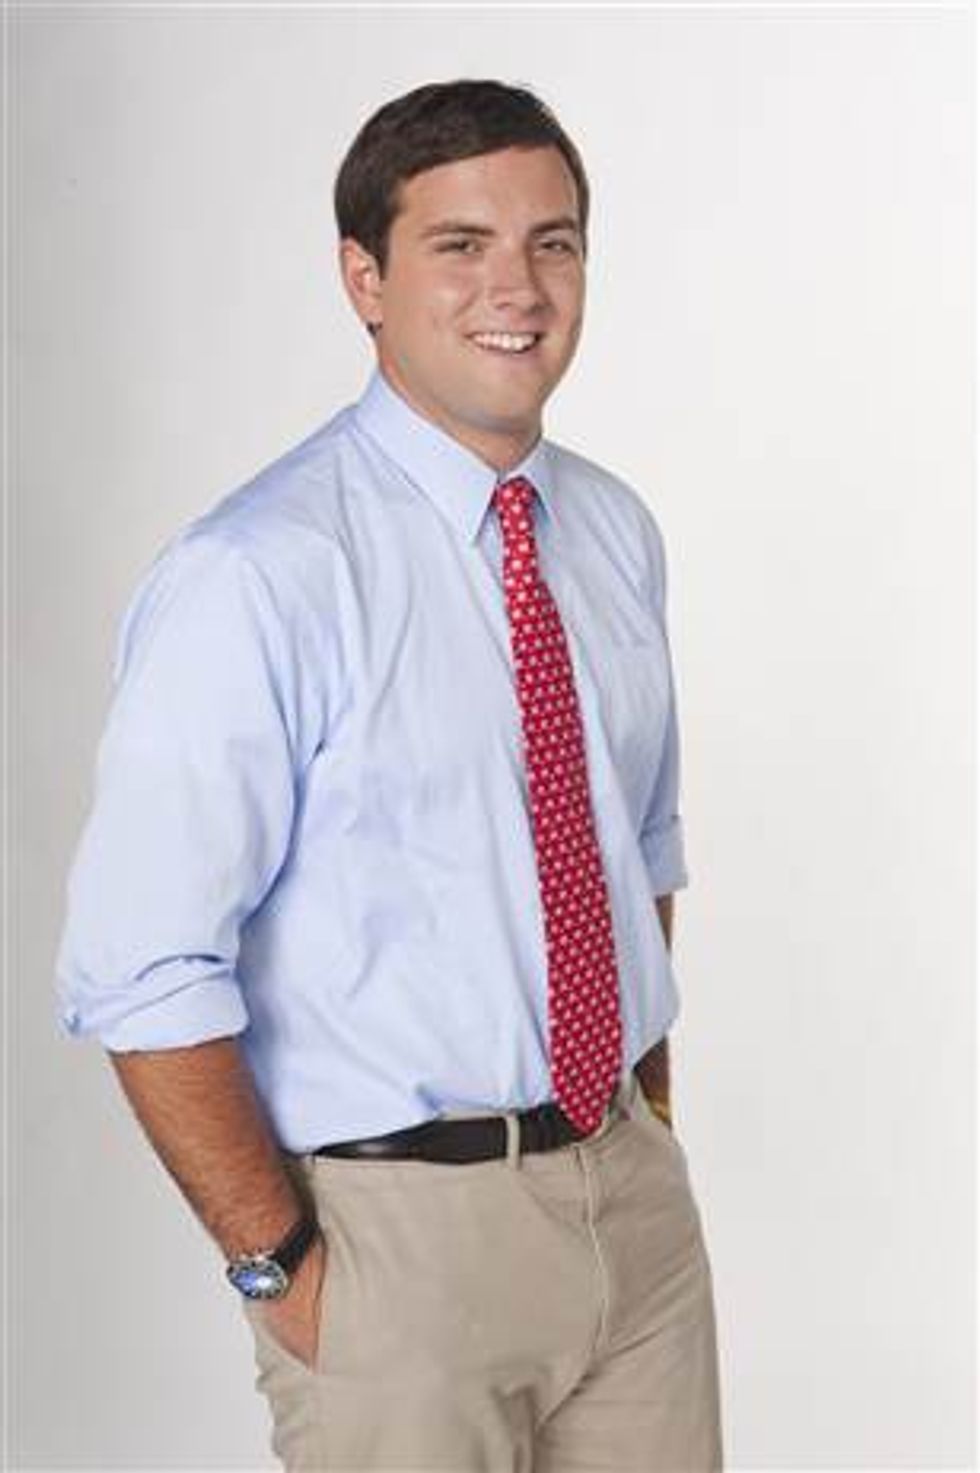 JC Penney's Boys Department Catalog Model Luke Russert: Why Is Obama Forcing Louie Gohmert To Put Him Under House Arrest?